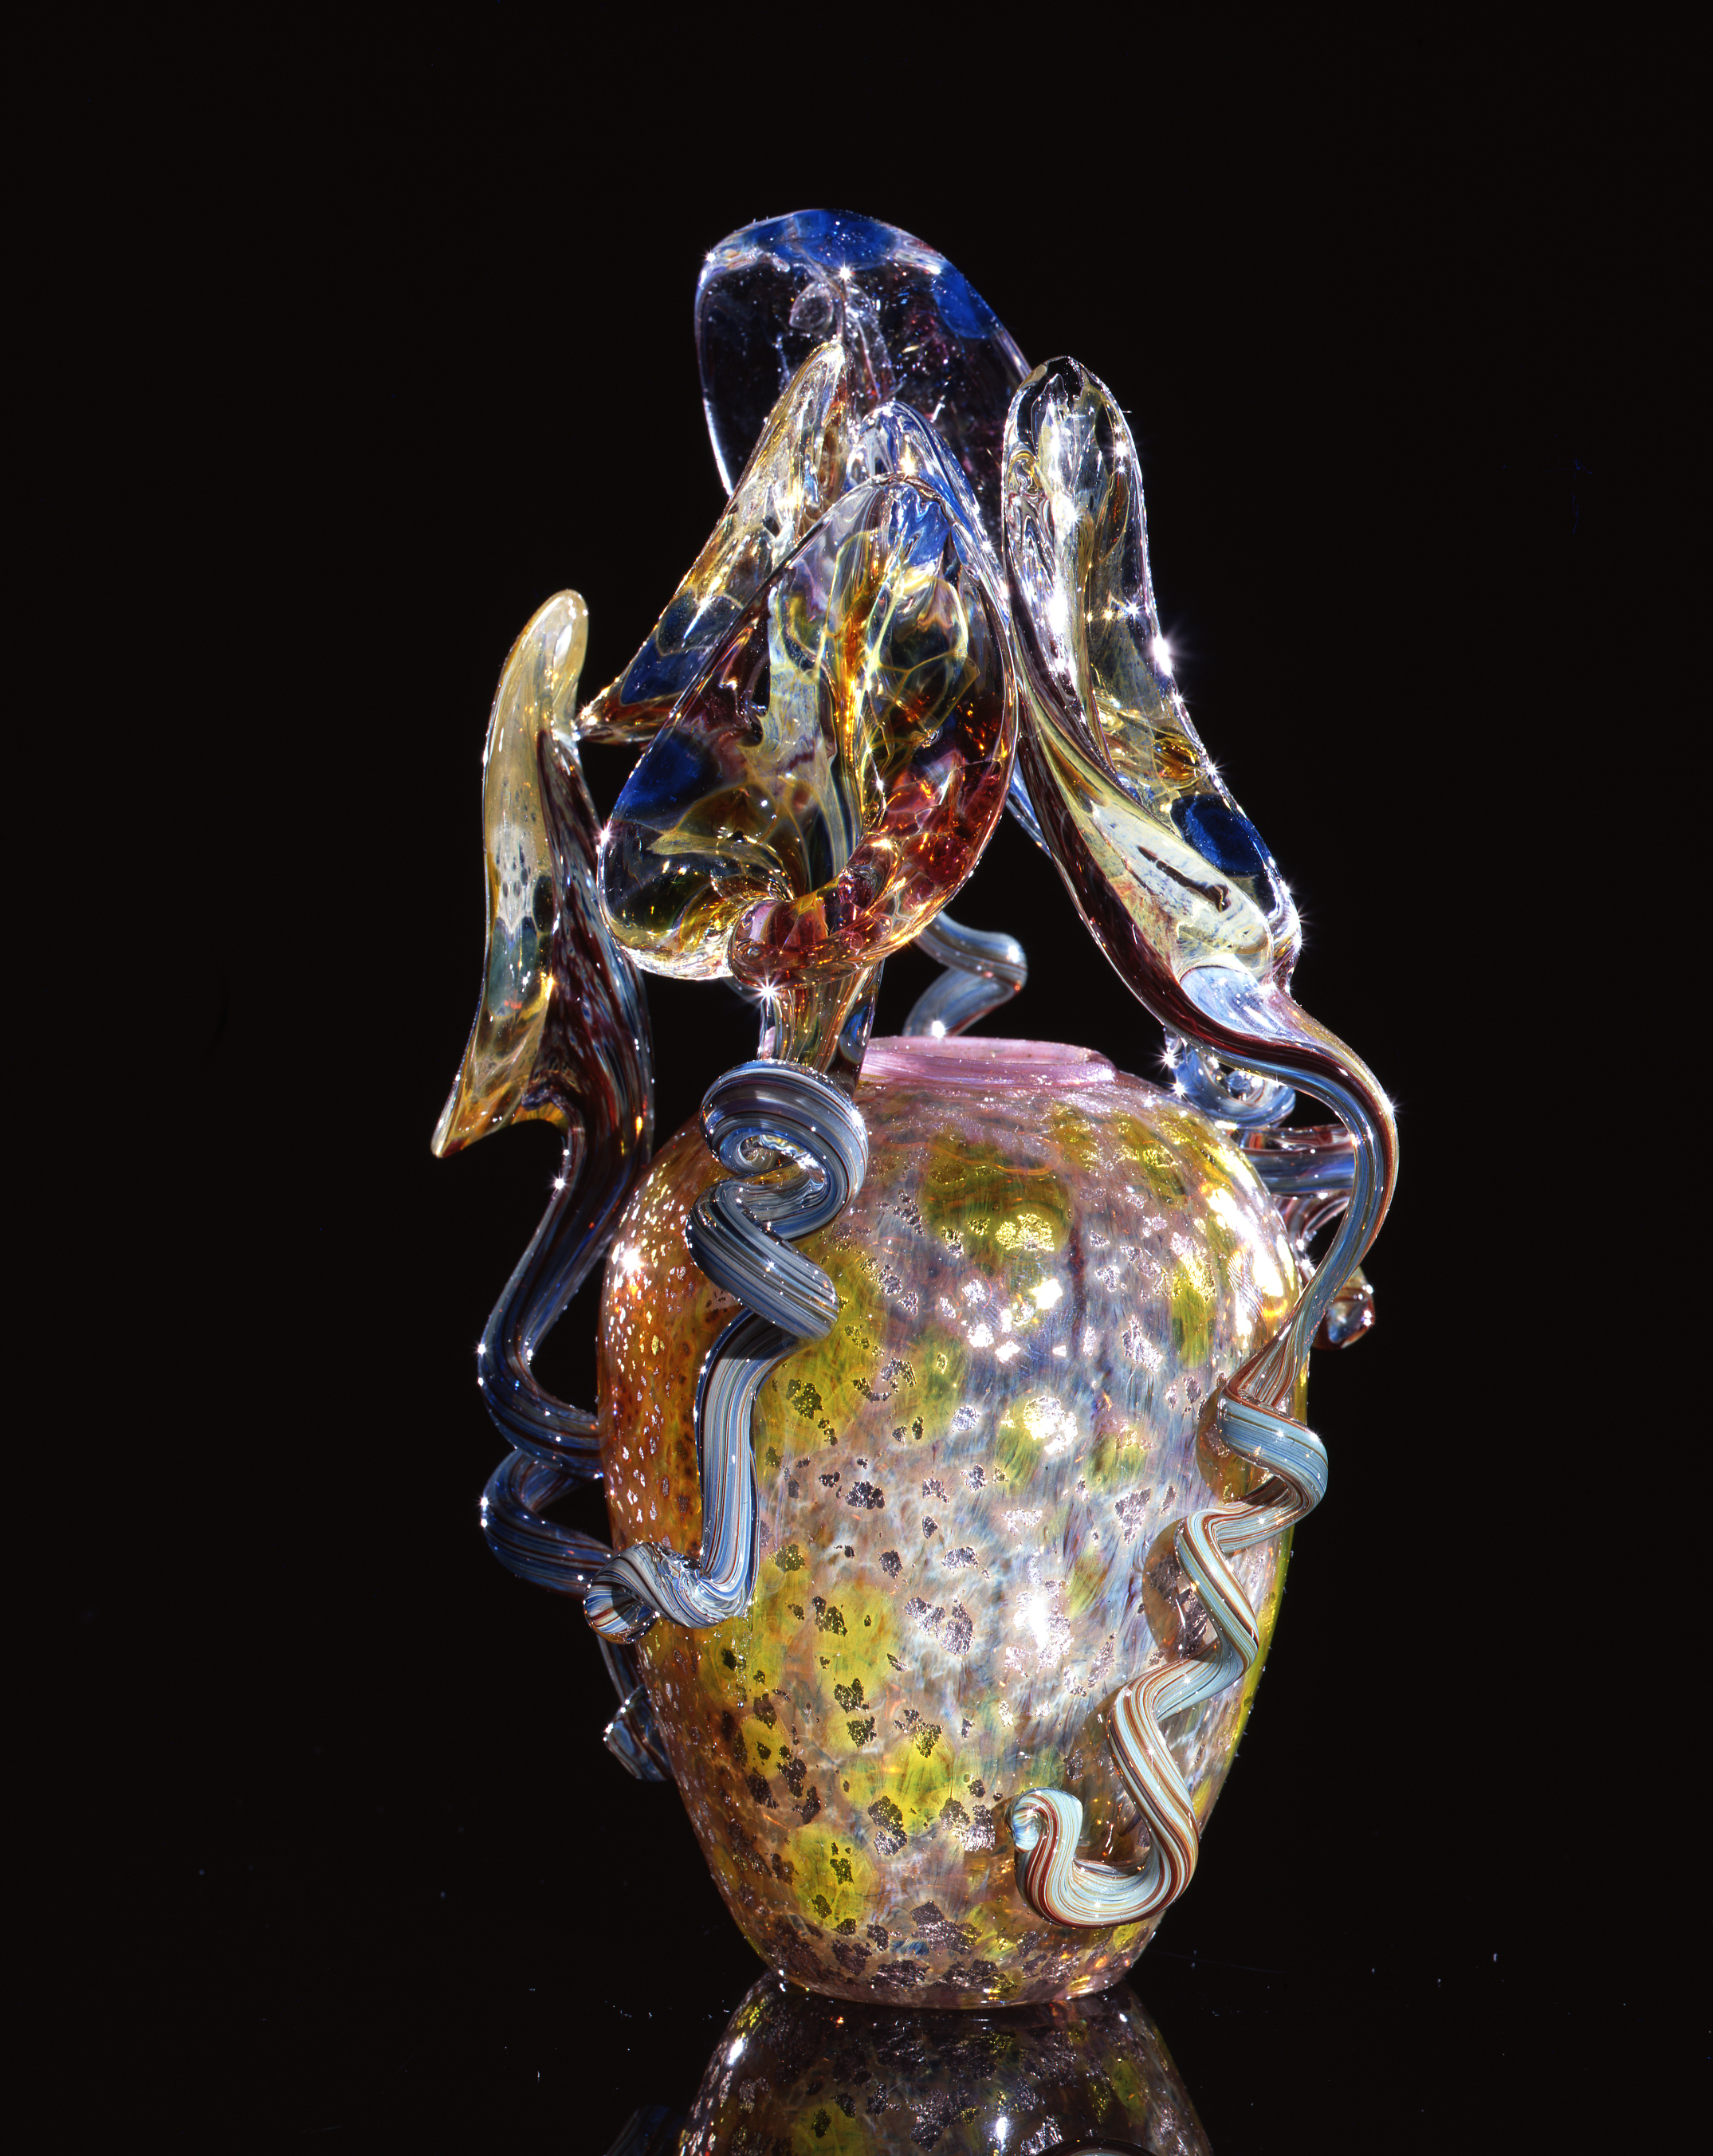  Dale Chihuly,  Lavender Piccolo Venetian with Cerulean Lilies&nbsp; (1993, glass, 8 x 5 x 5 inches) 